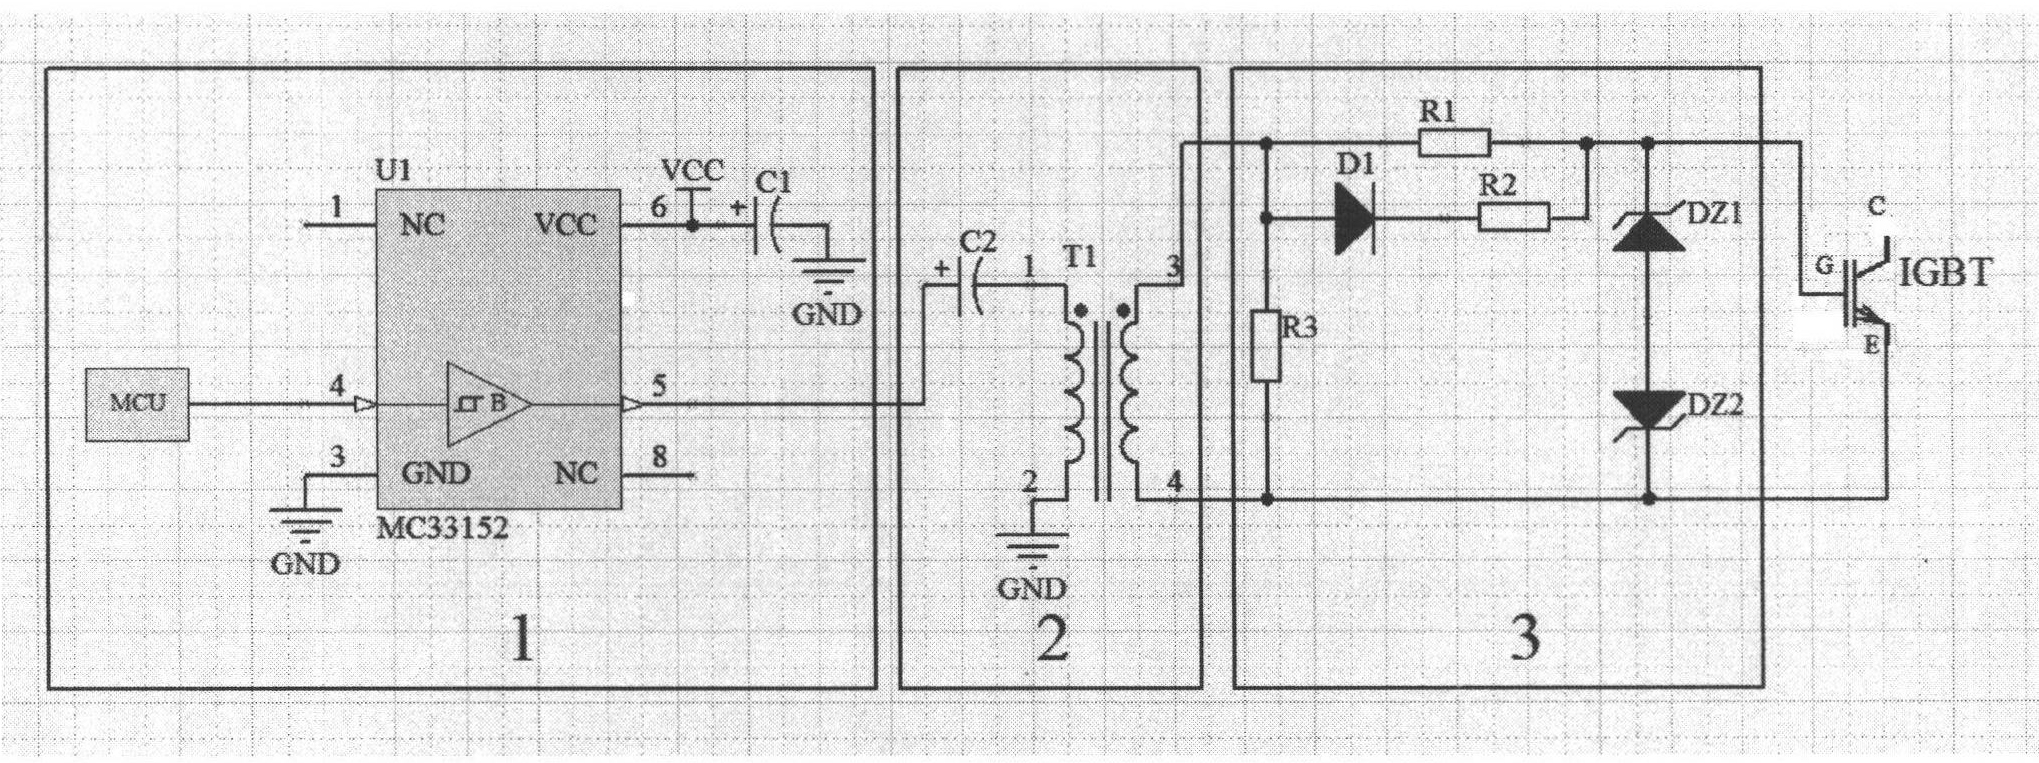 IGBT (Insulated Gate Bipolar Translator) driving circuit for novel high-frequency high-voltage switching power supply